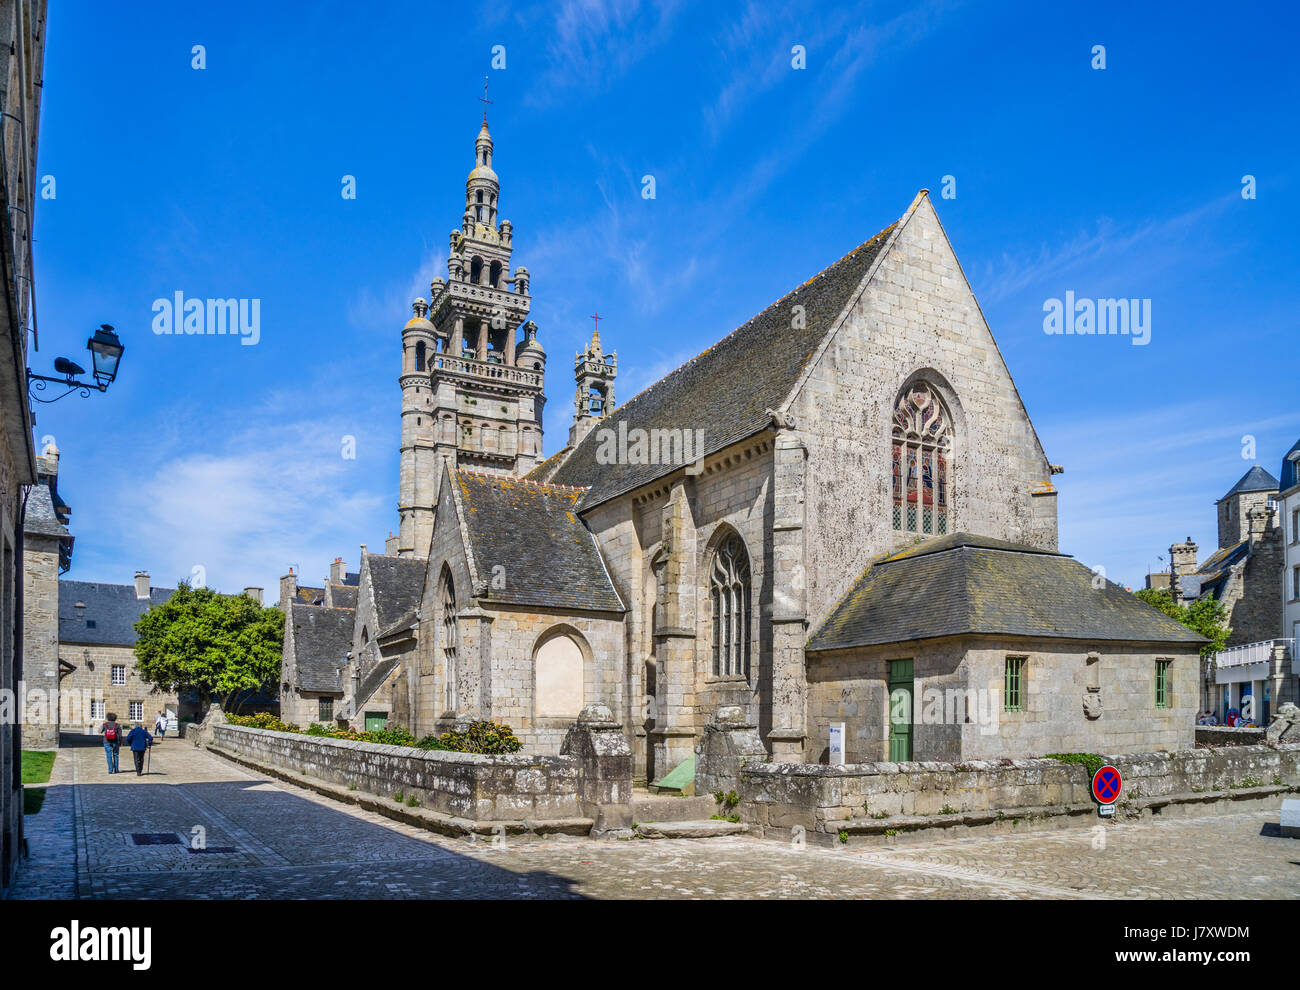 France, Brittany, Finistére department, Roscoff, the parish church of Our Lady of Croaz Batz with its distinctive double gallery bellfries. Stock Photo